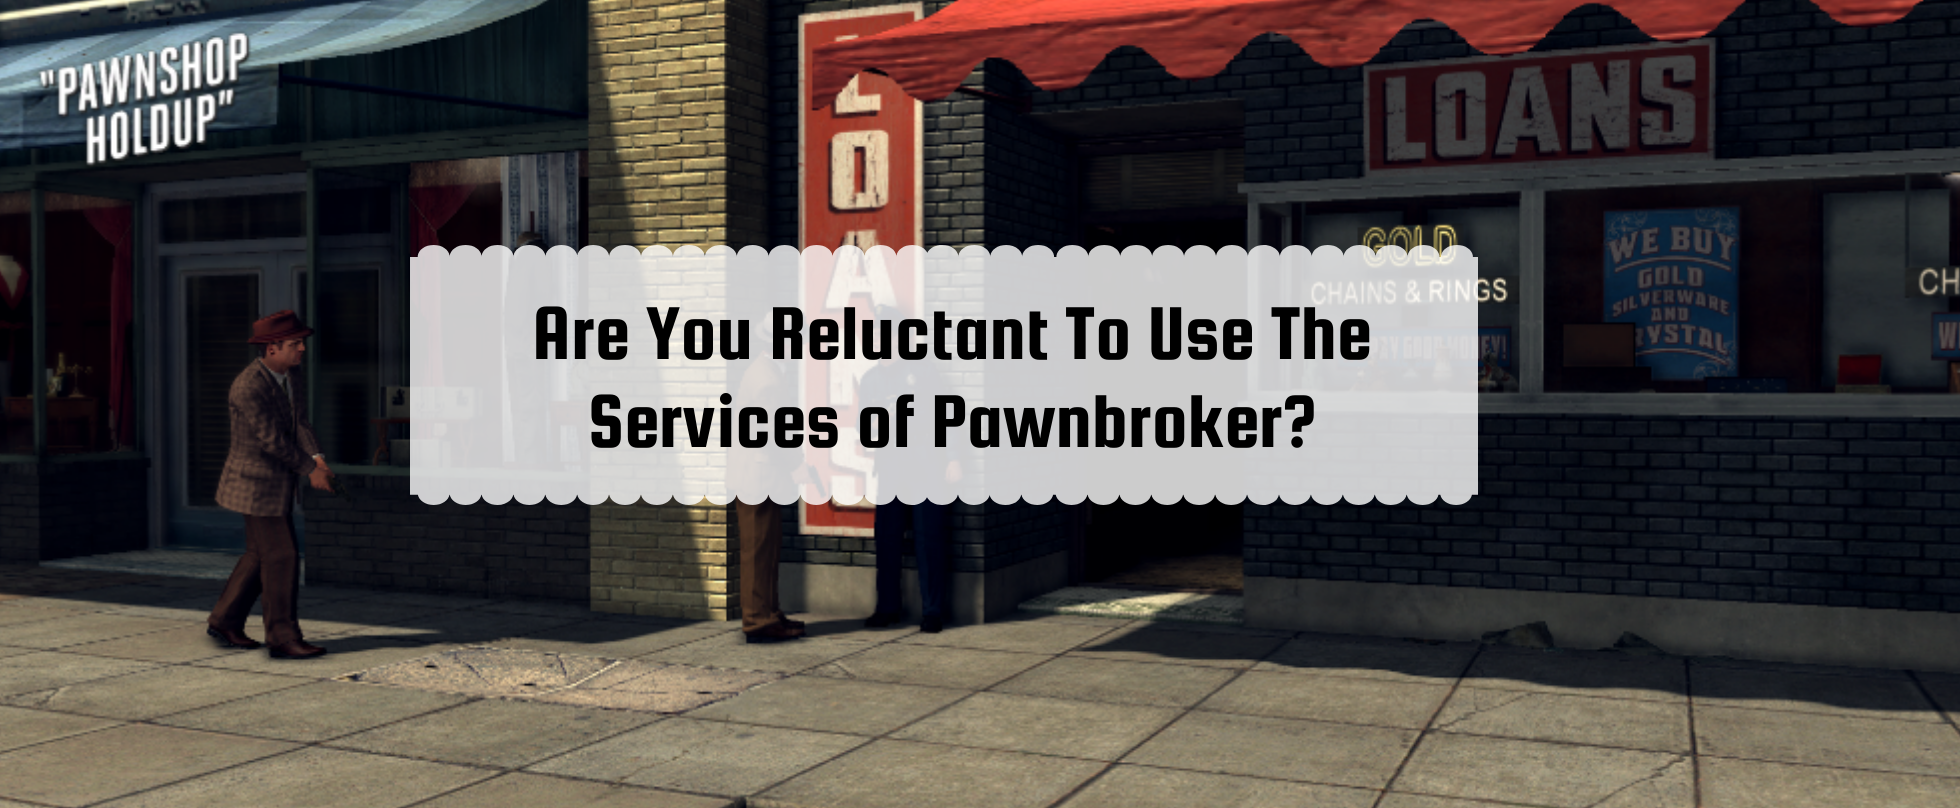 Are You Reluctant to Use The Services of Pawnbroker